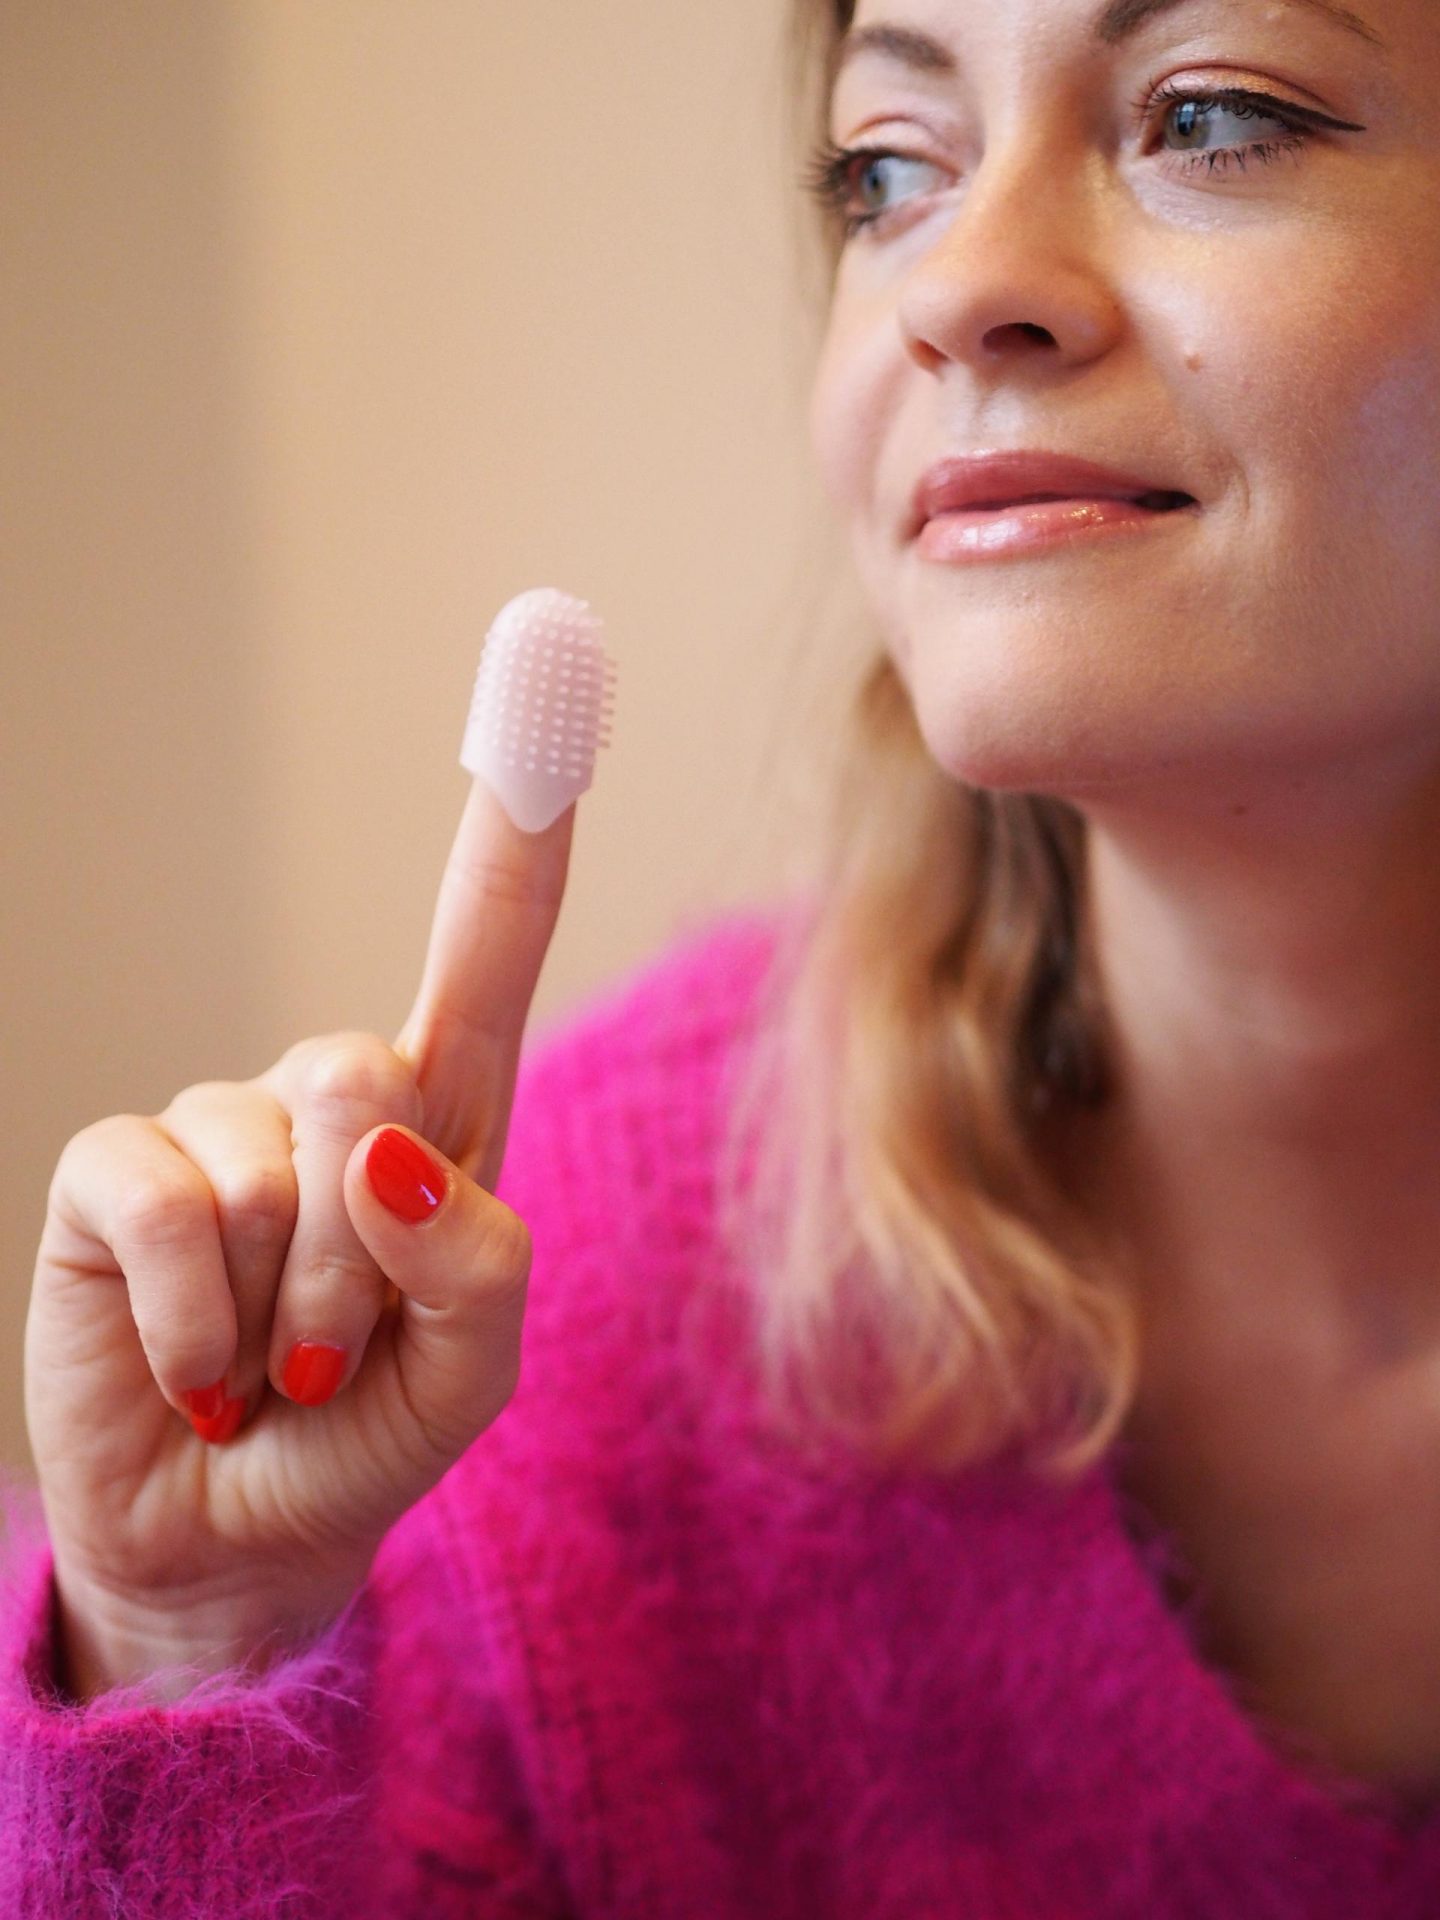 cleaning teeth on the go - iko Finger Toothbrush from Melo Labs